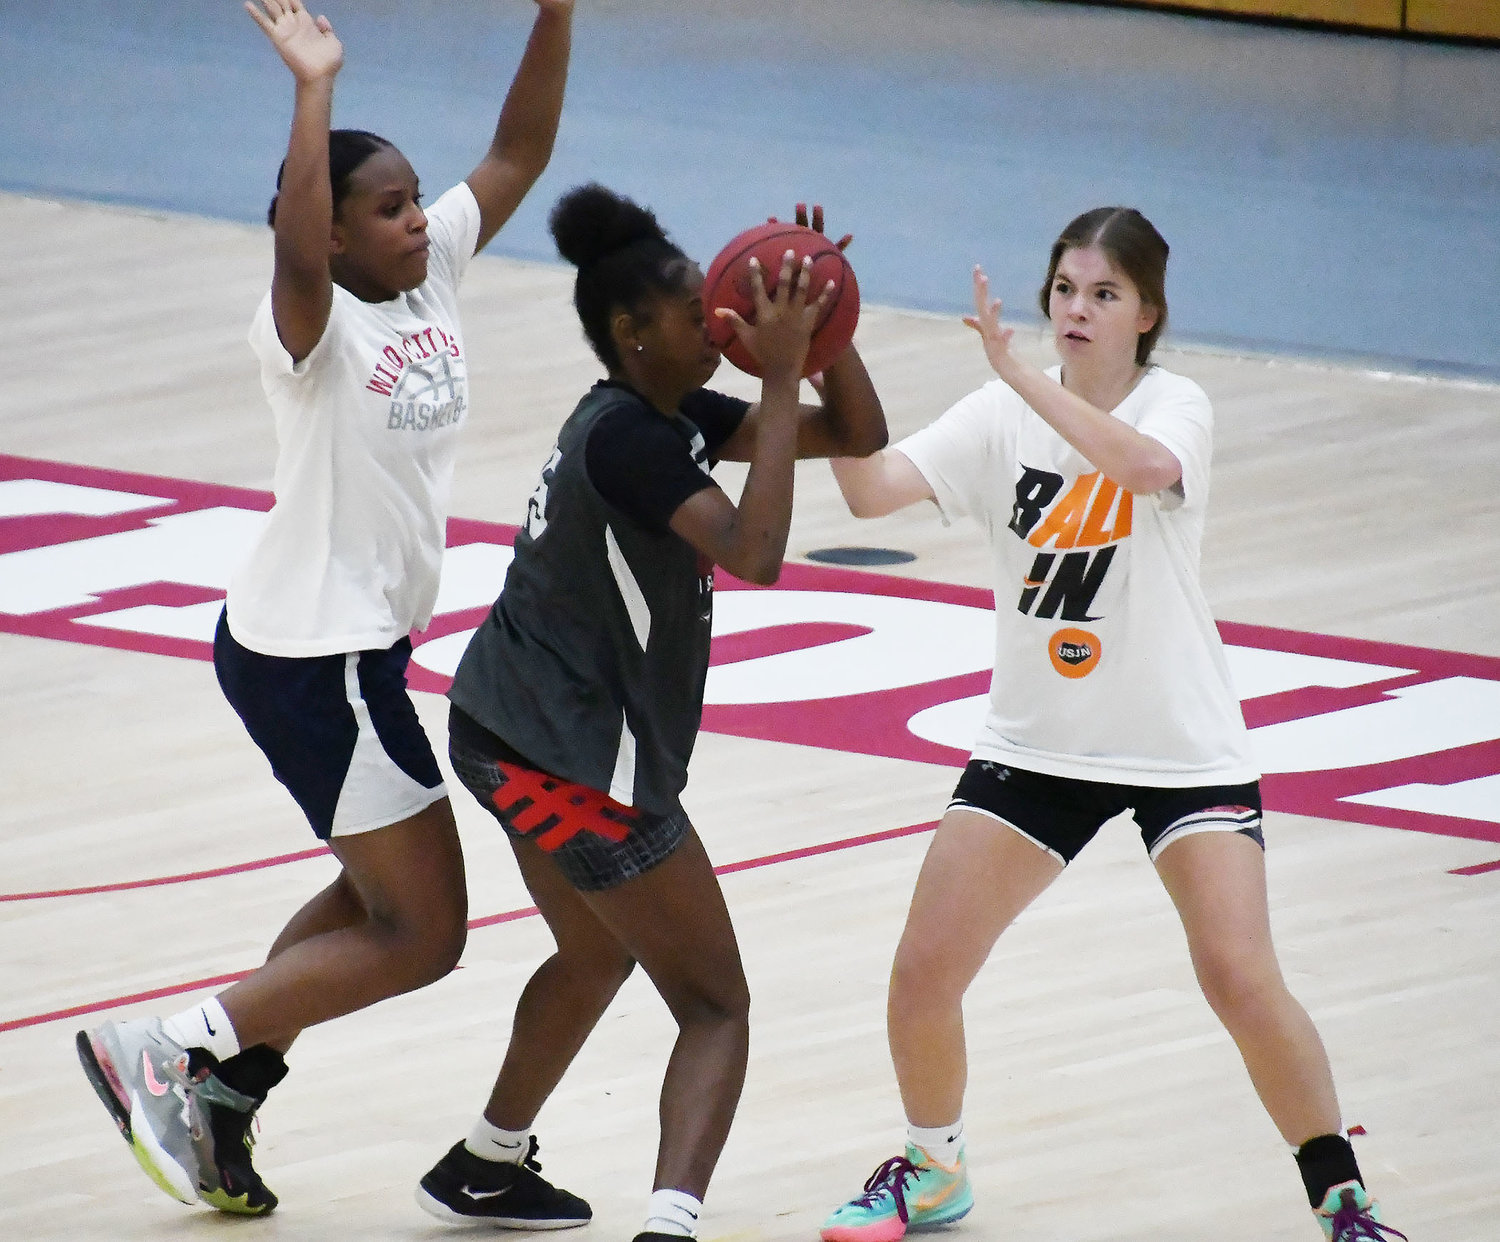 Afternoon's "elite" camp session featured competitive scrimmages.